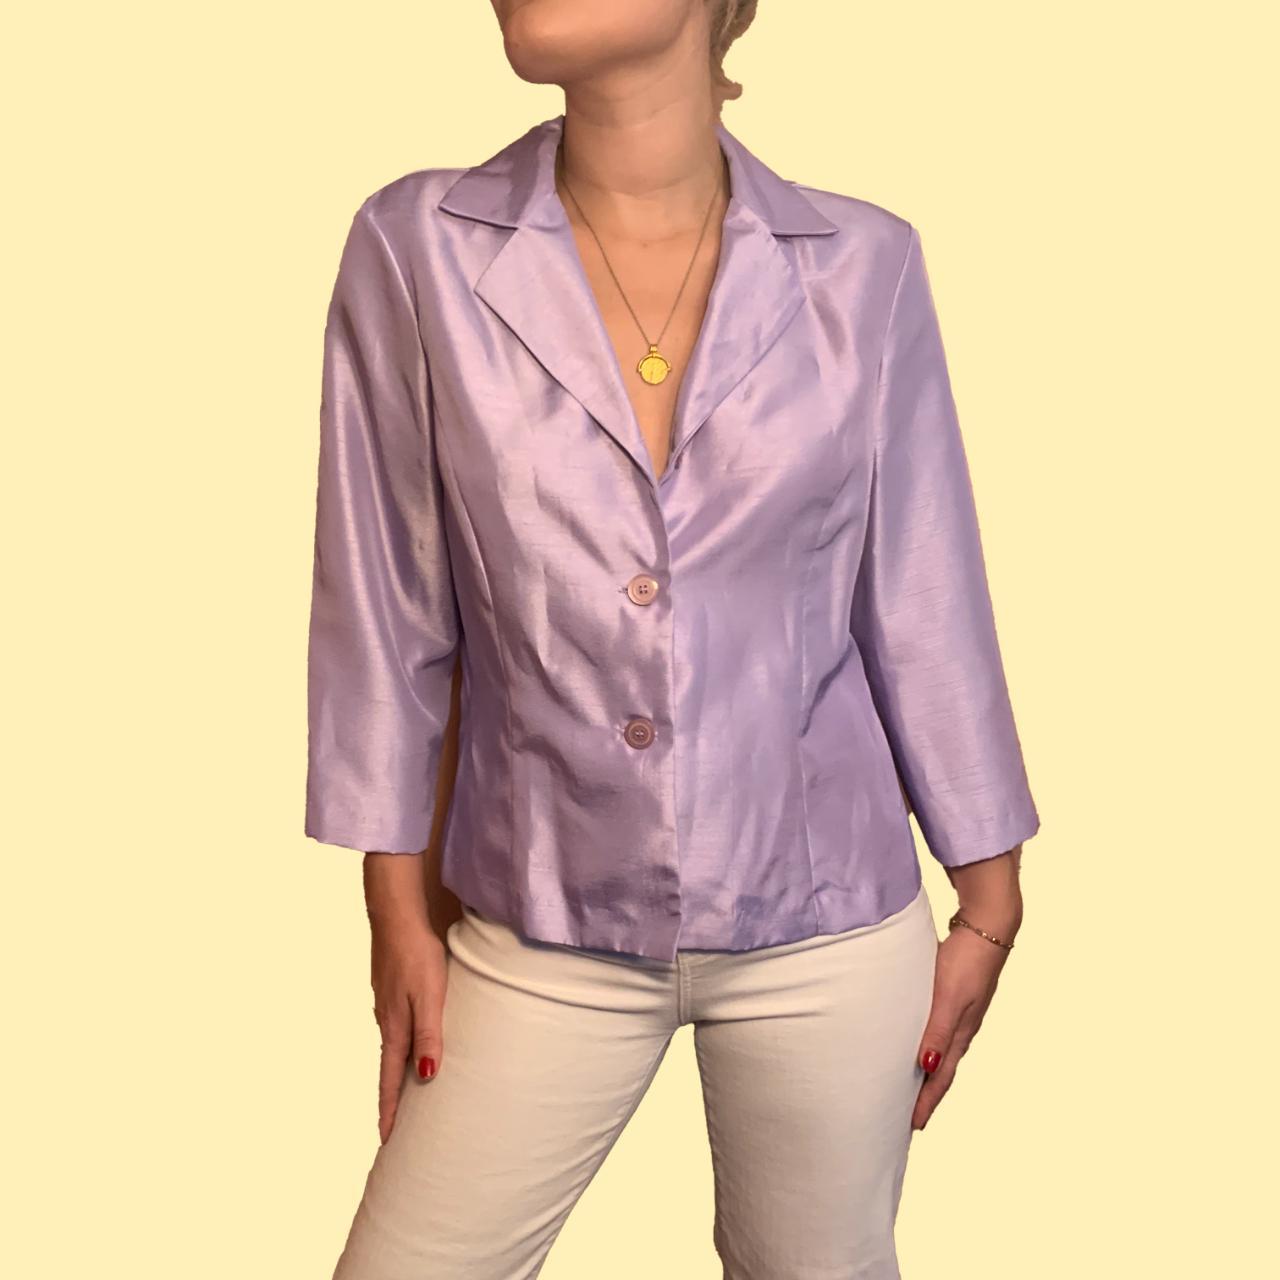 Product Image 3 - 80s women's bright violet satin